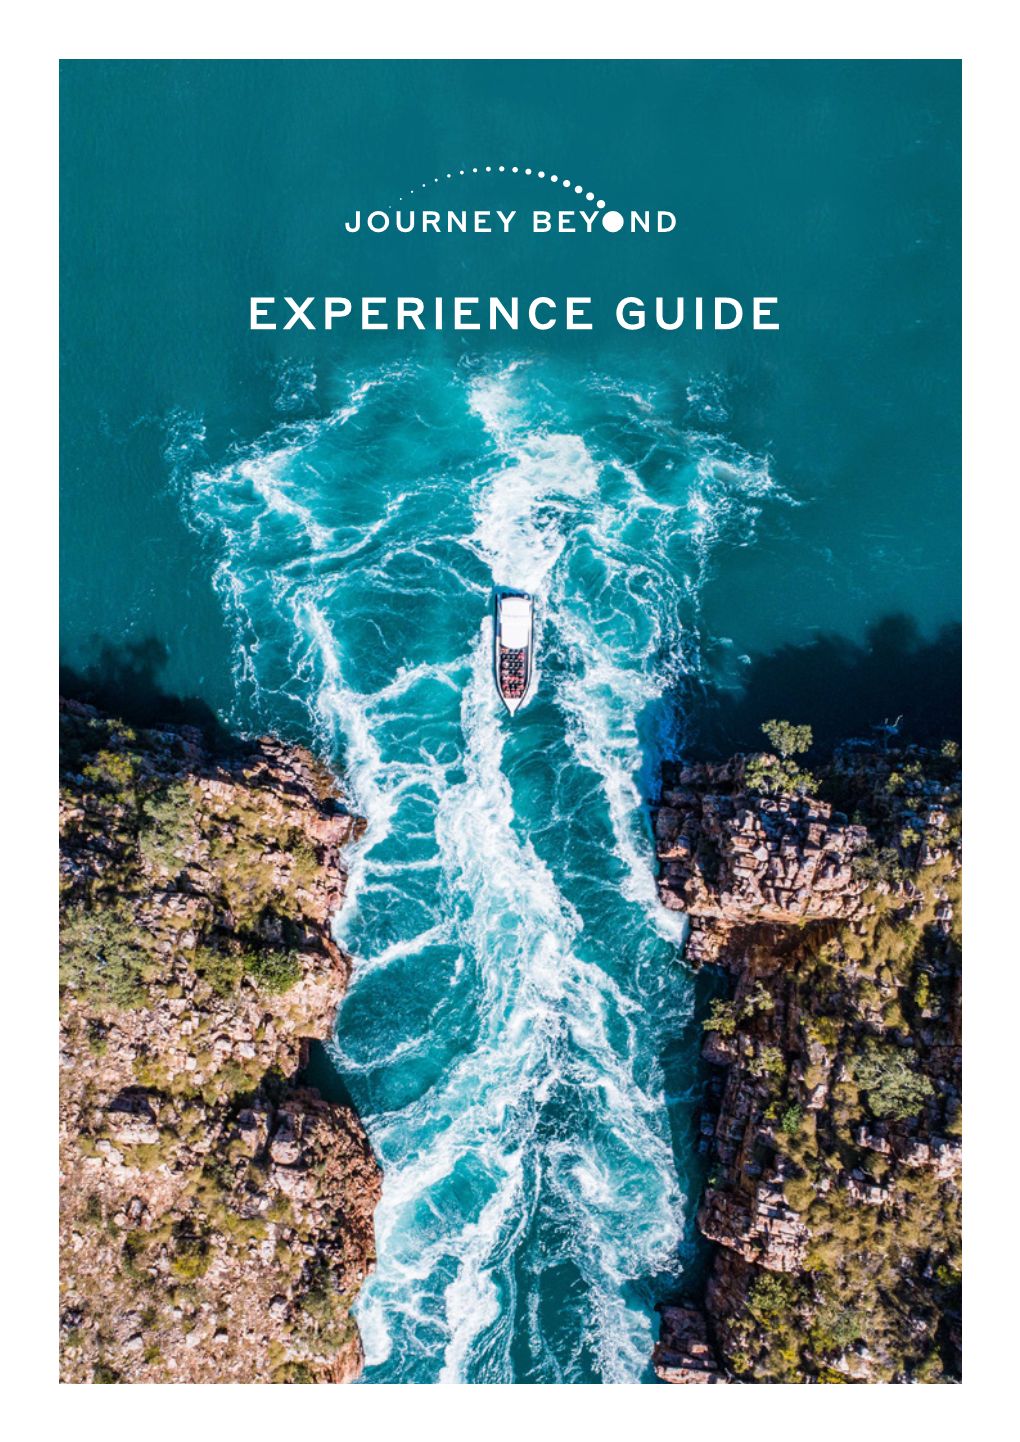 Experience Guide Join Us on an Unforgettable Journey… One That Will Take You Beyond to New Places… to New Experiences That Will Ignite Your Imagination